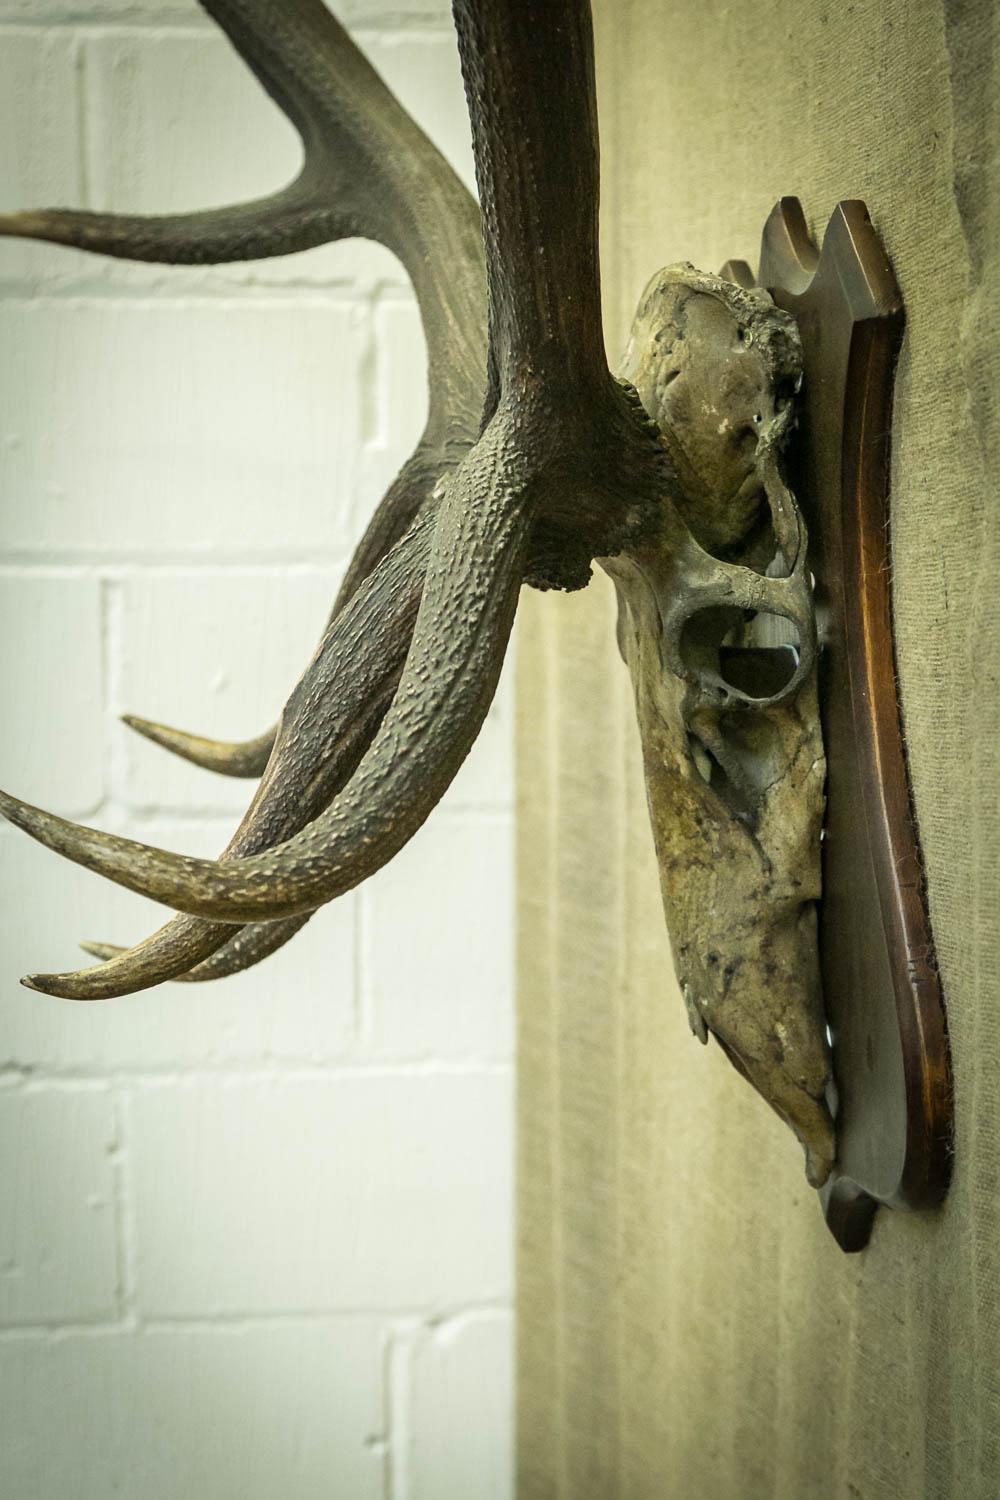 A monumental pair of antlers, Wapiti (Cervus Elaphus Nelsoni). 
Mounted on the original backboard with the name Wapiti inscribed to the reverse of the shield.
The skull has been split down the middle to aid the original transportation of the